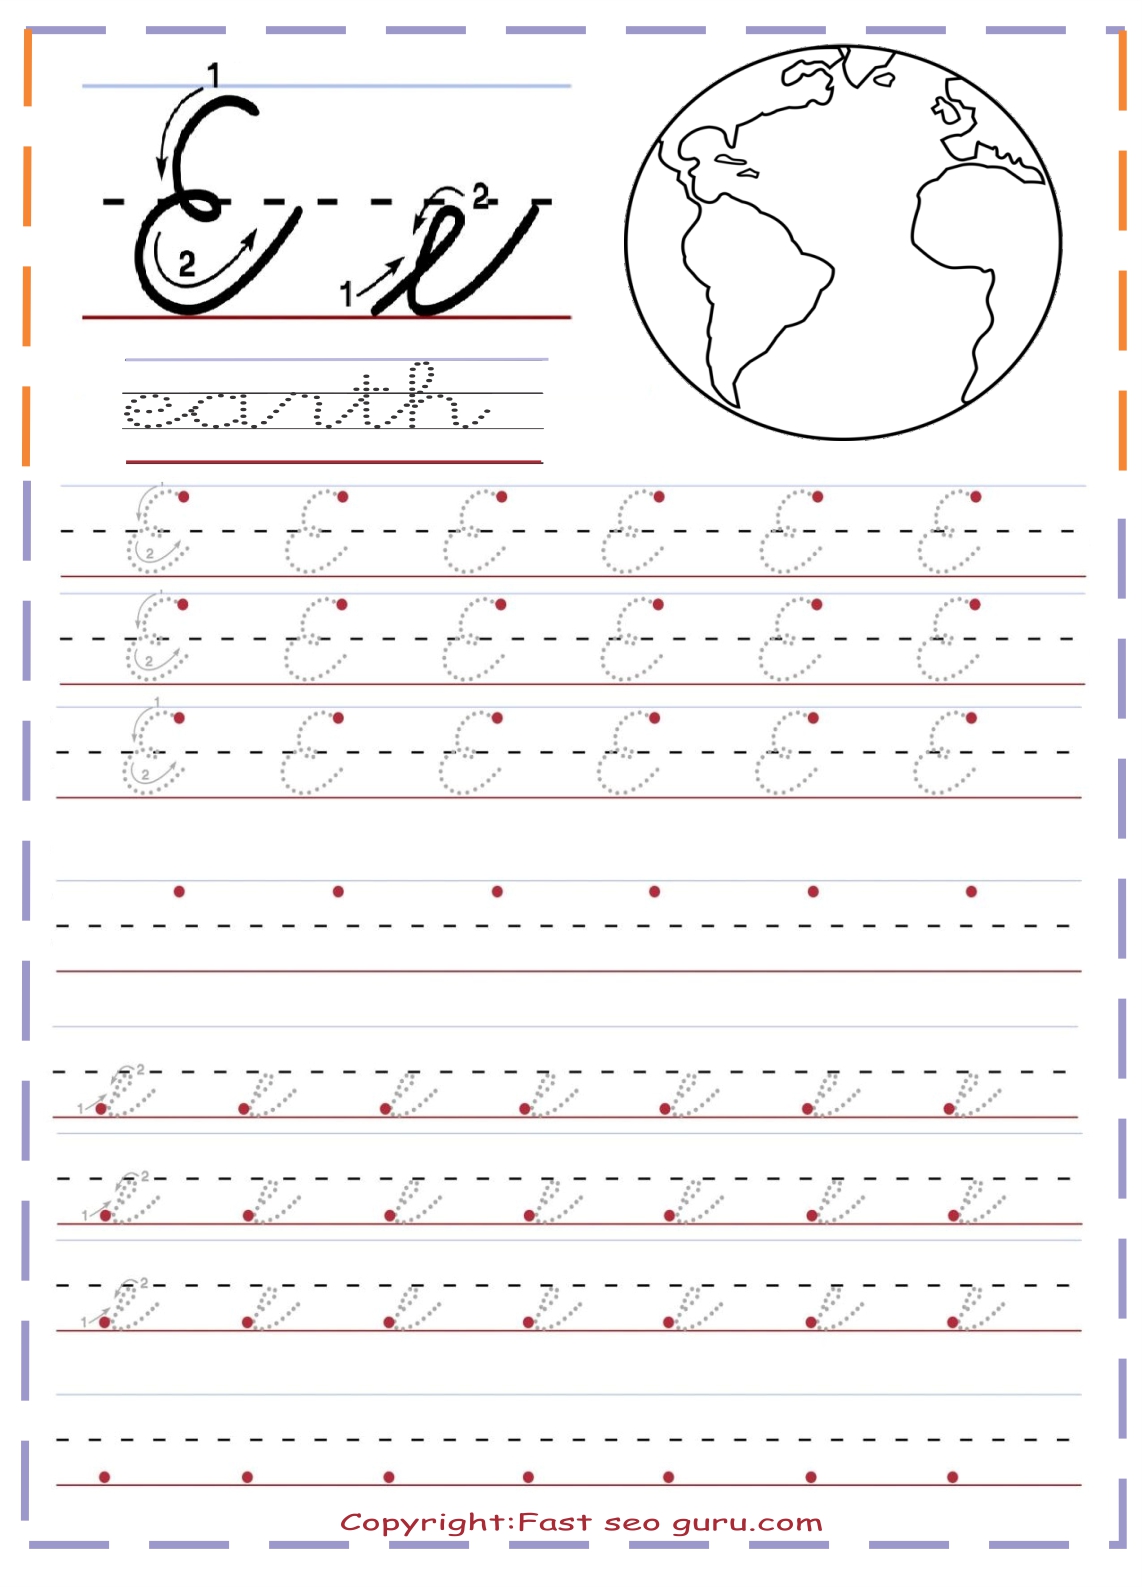 cursive handwriting tracing sheets for practice letter E